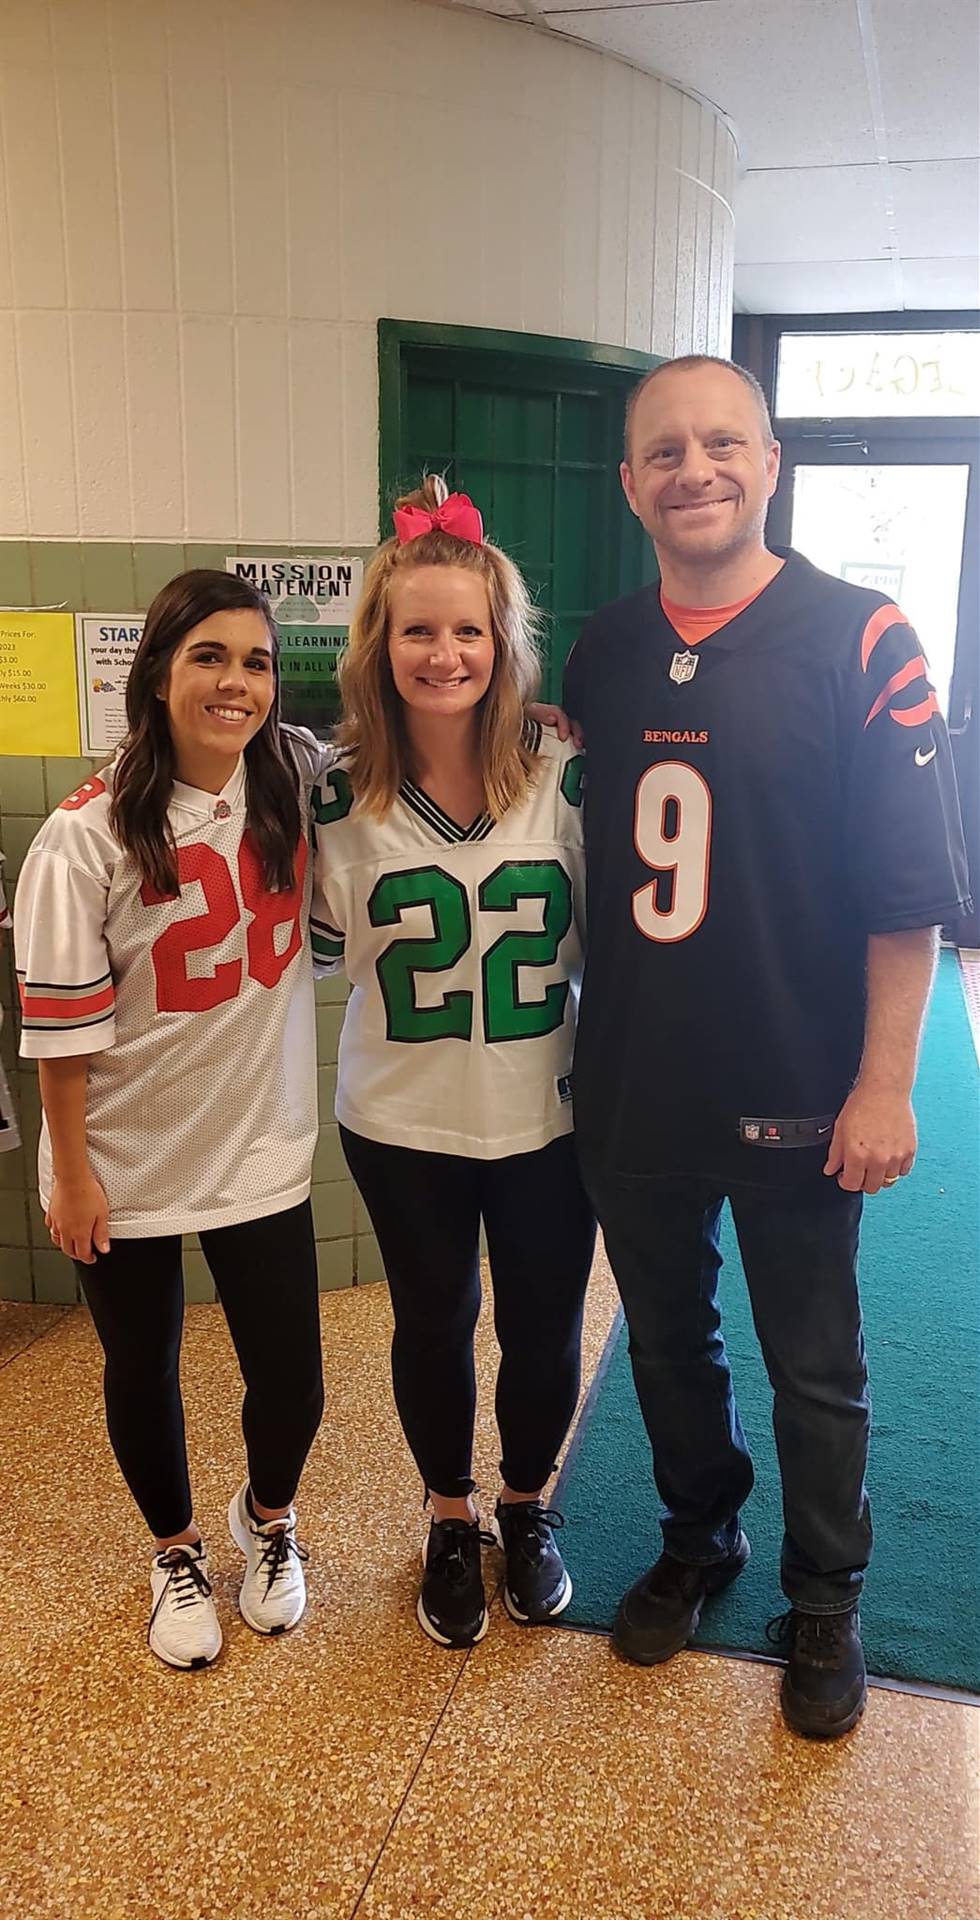 Jersey Day during Red Ribbon Week